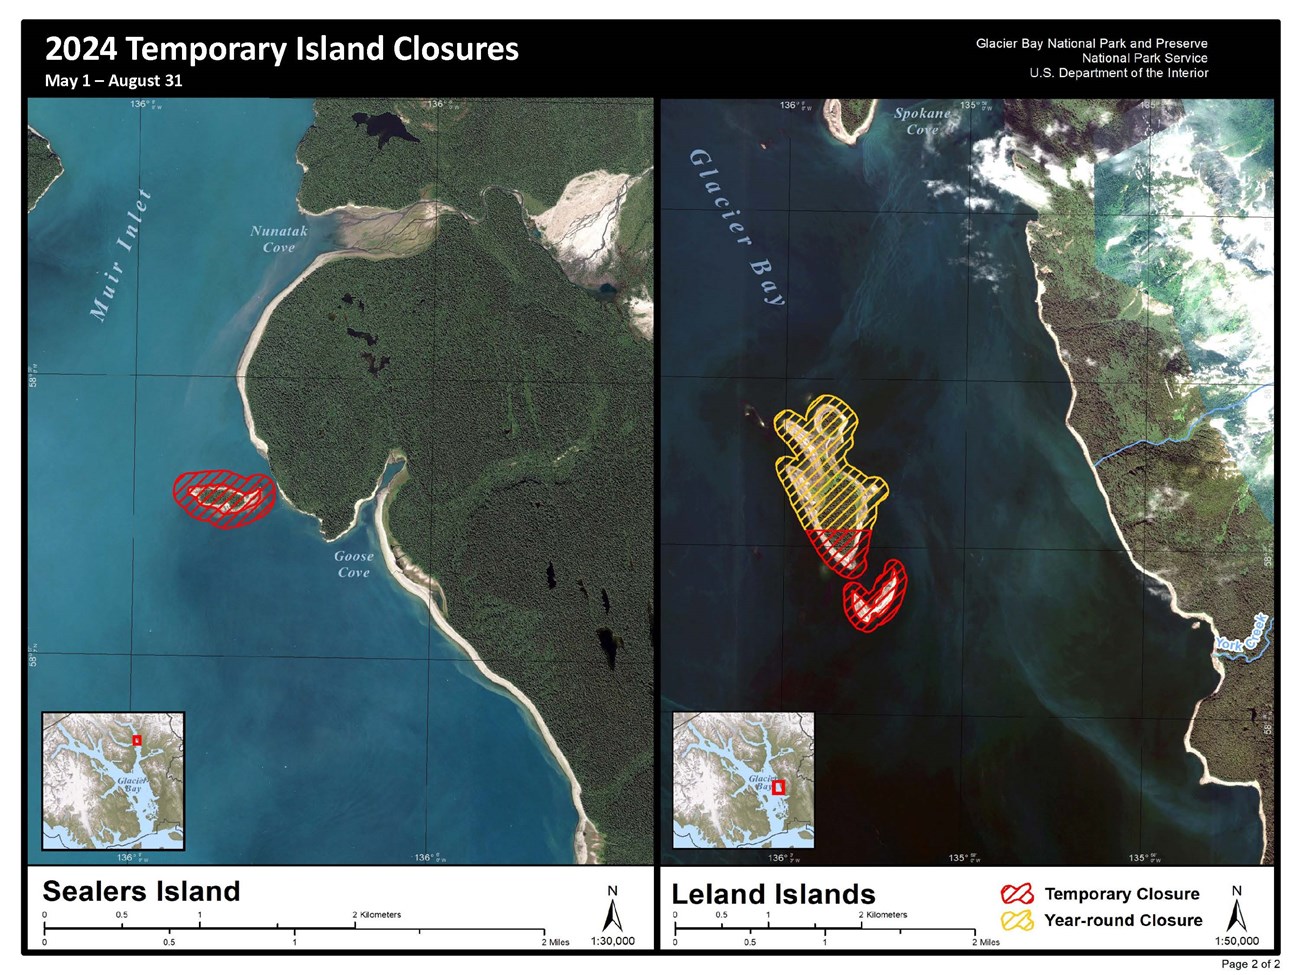 Map showing 2024 temporary island closures at Sealers Island and Leland Islands. Contact the park for details- 907-697-2230